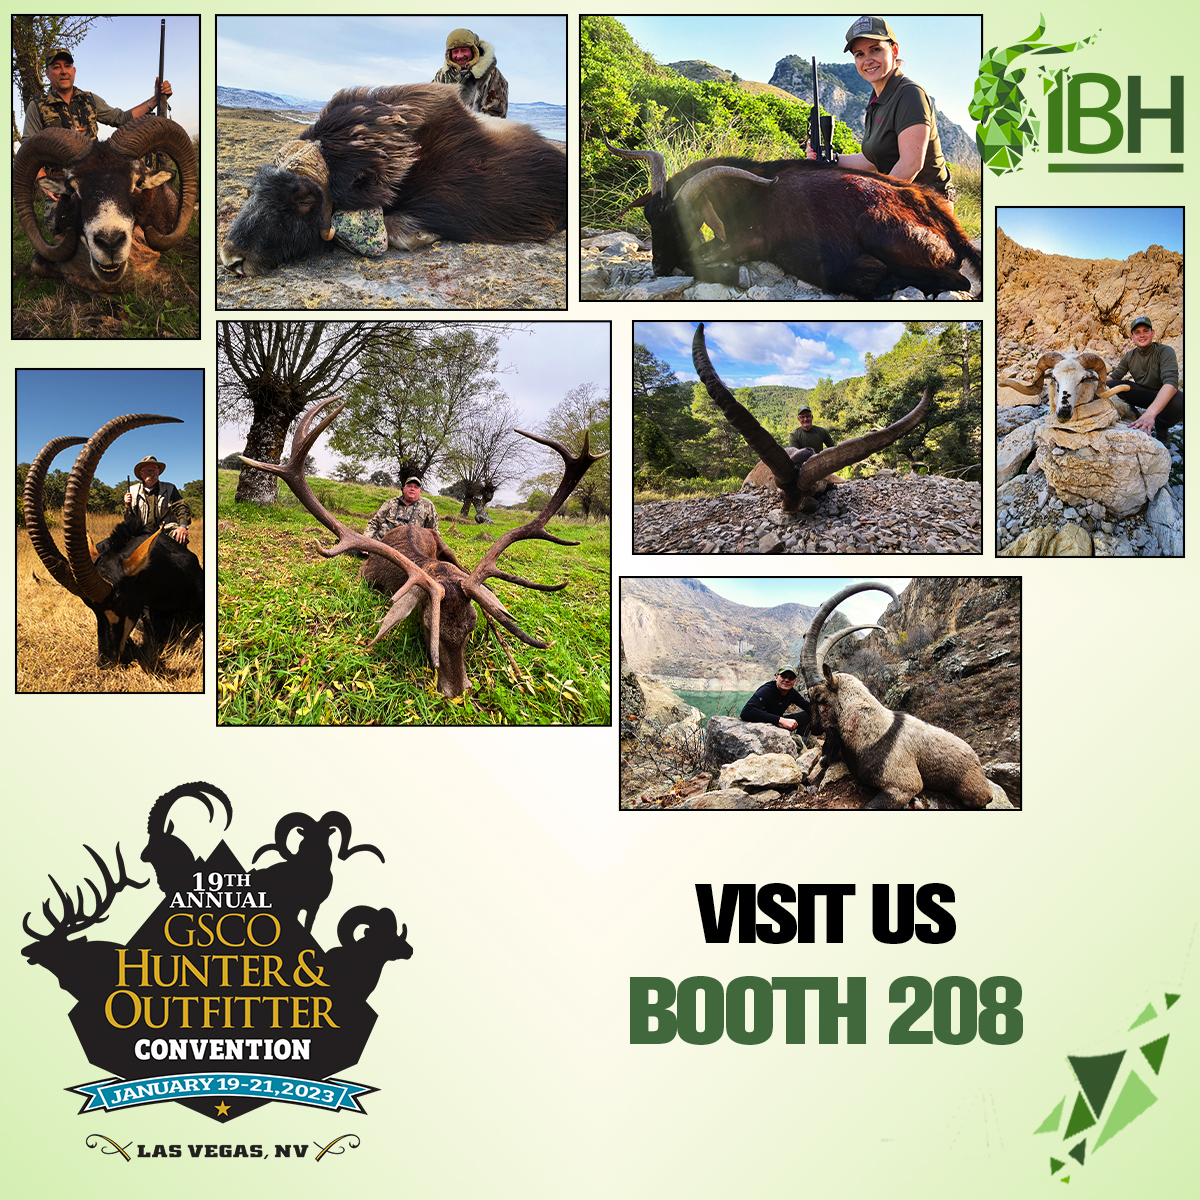 IberHunting at GSCO convention, Booth 208